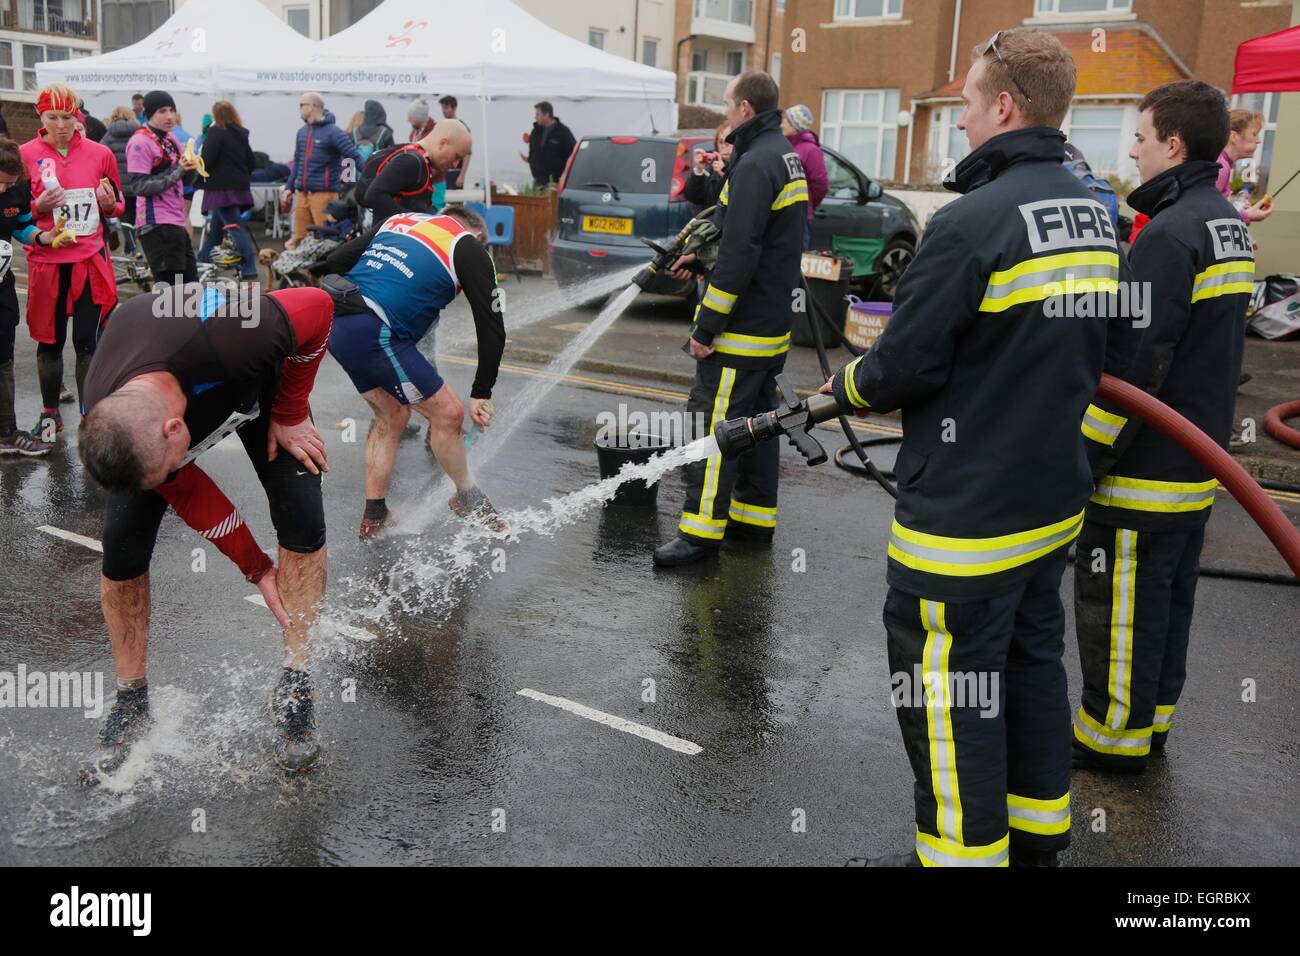 Seaton, Devon, UK. 1 March,  2015:  Firefighters hose mud of the runners after they have finished the Annual 'Grizzly' race.  This gruelling 20 mile cross country race traces its way along cliff paths, across hilly terrain, ascends and descends more than 3,500 ft and presents runners with muddy bogs, waist deep water and steep cliffs. The race, which is organised by the Axe Valley Runners, has attracted entrants from as far afield as Cyprus and the USA.  Credit:  Tom Corban/Alamy Live News Stock Photo